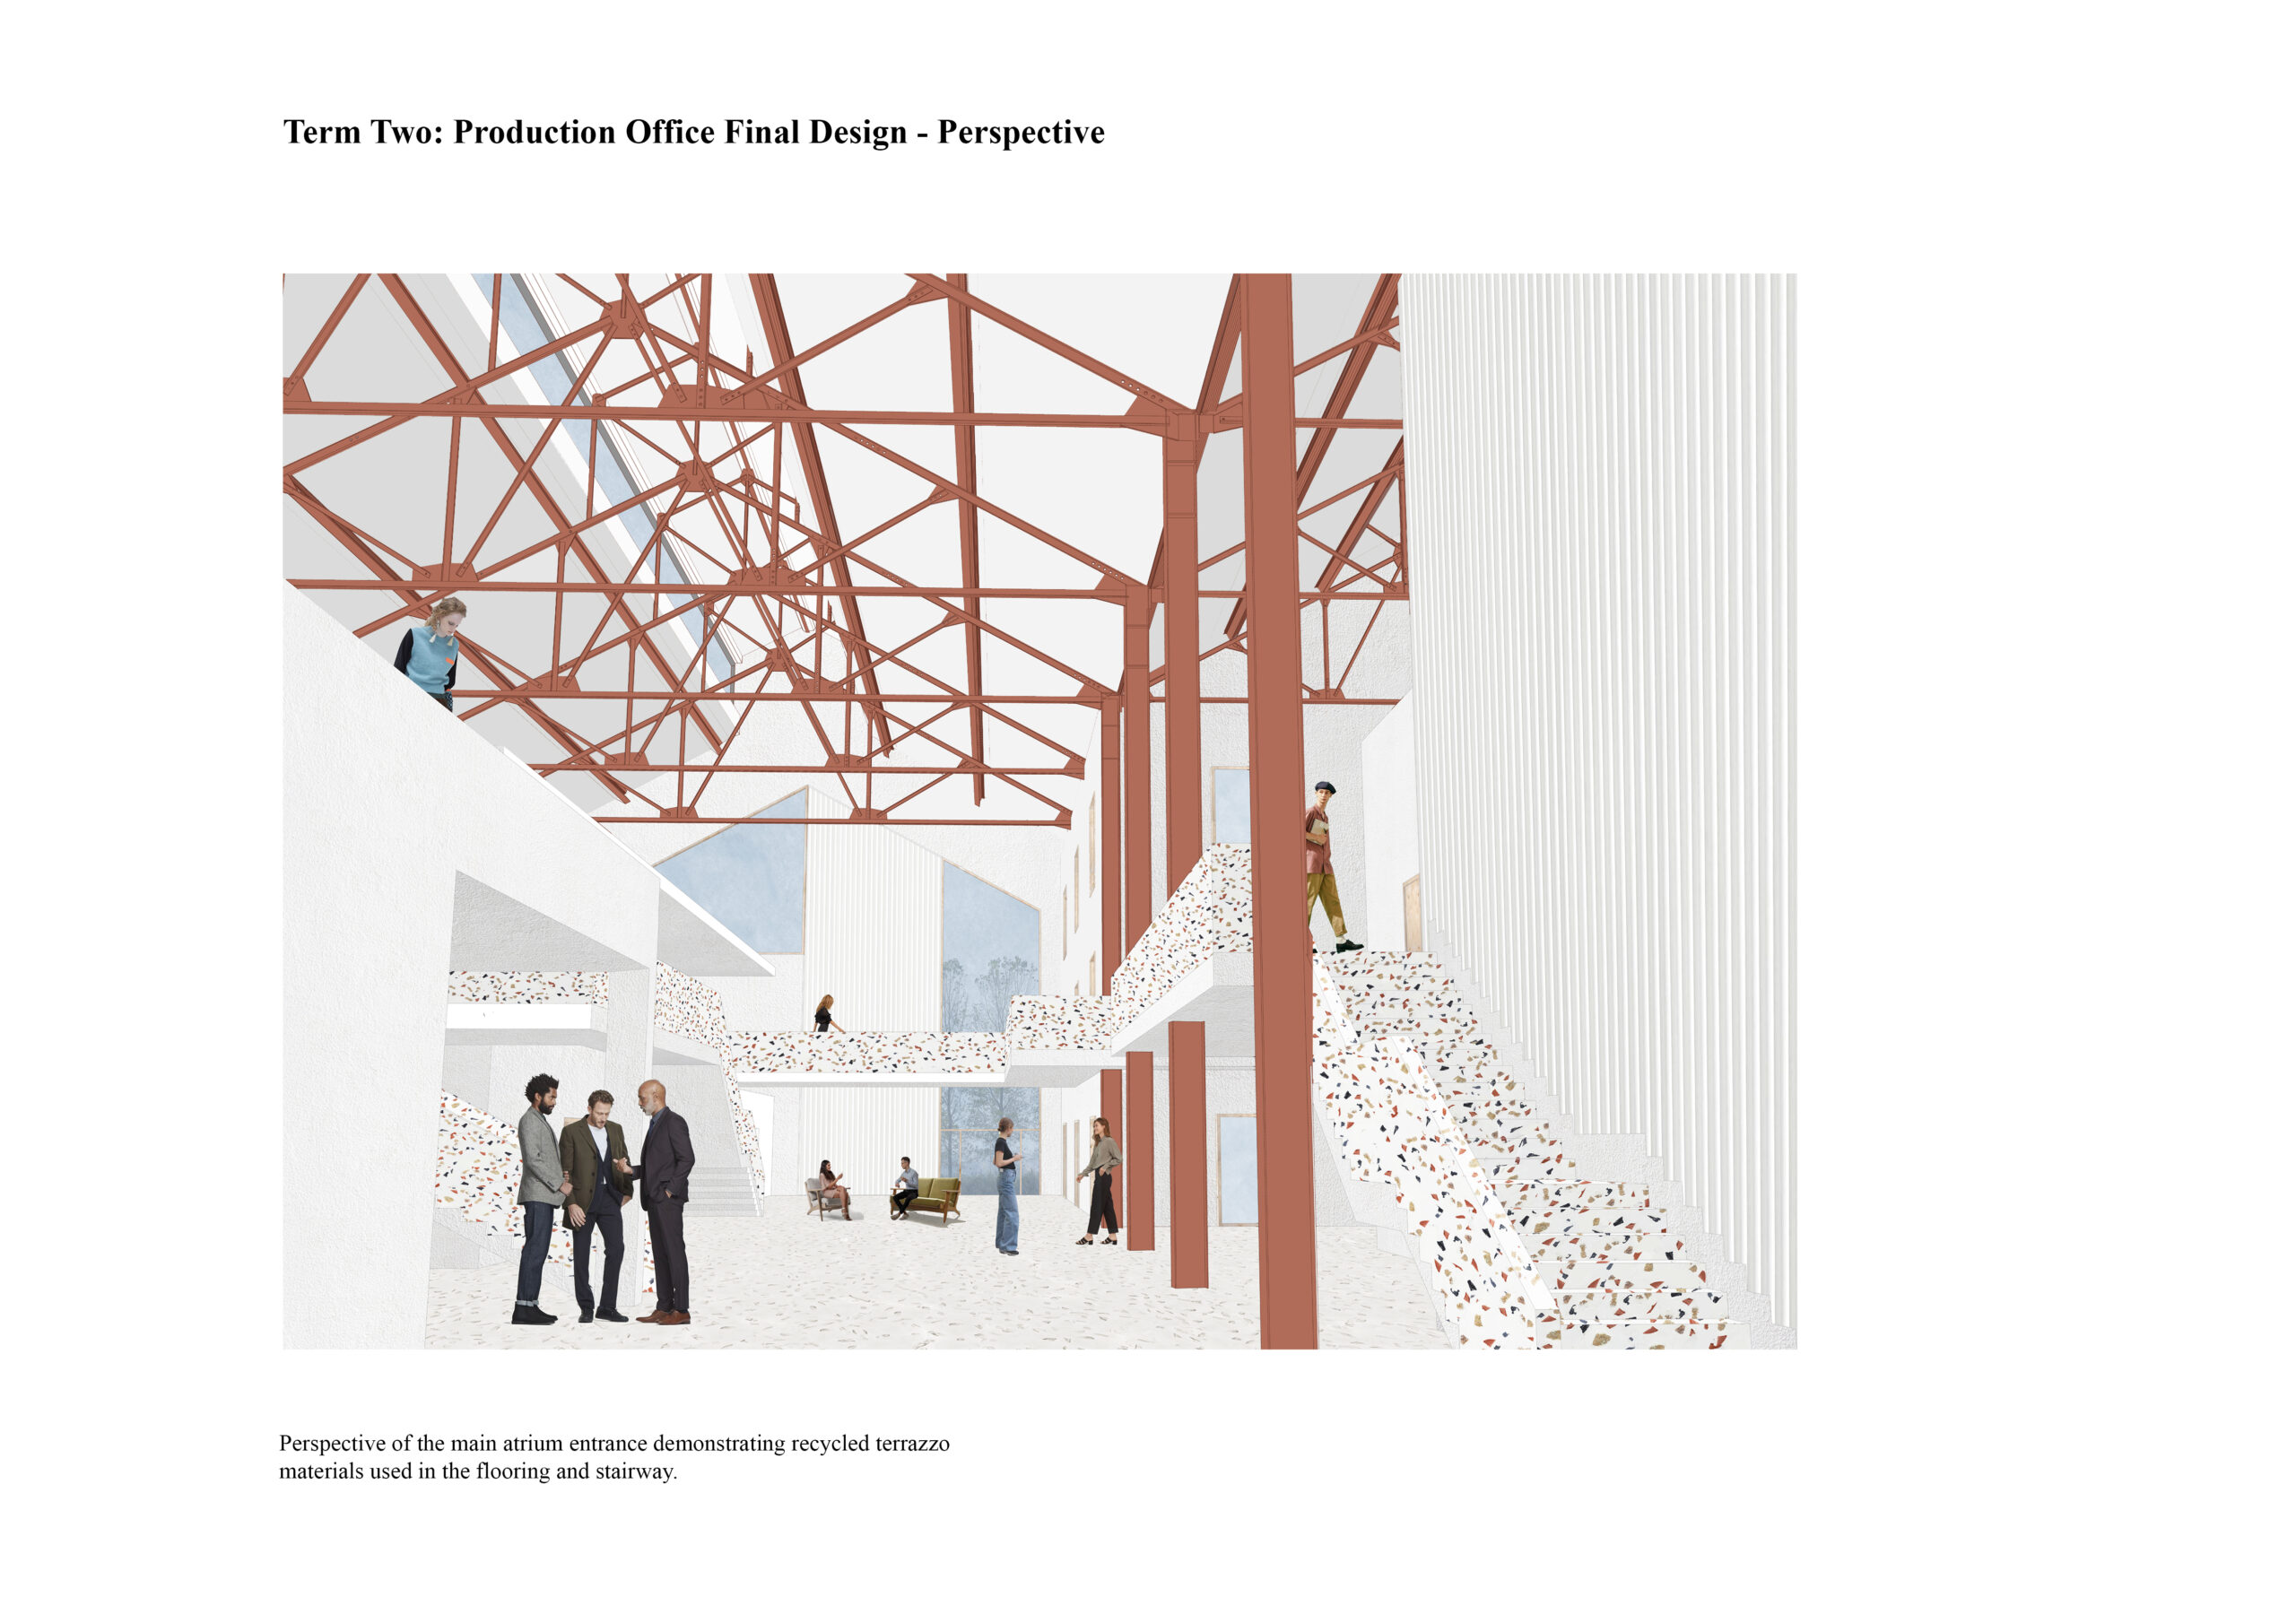 Portfolio Page of a perspective of the production office, focusing on the main atrium space demonstrating recycled terrazzo materials used in the flooring and the stairway.